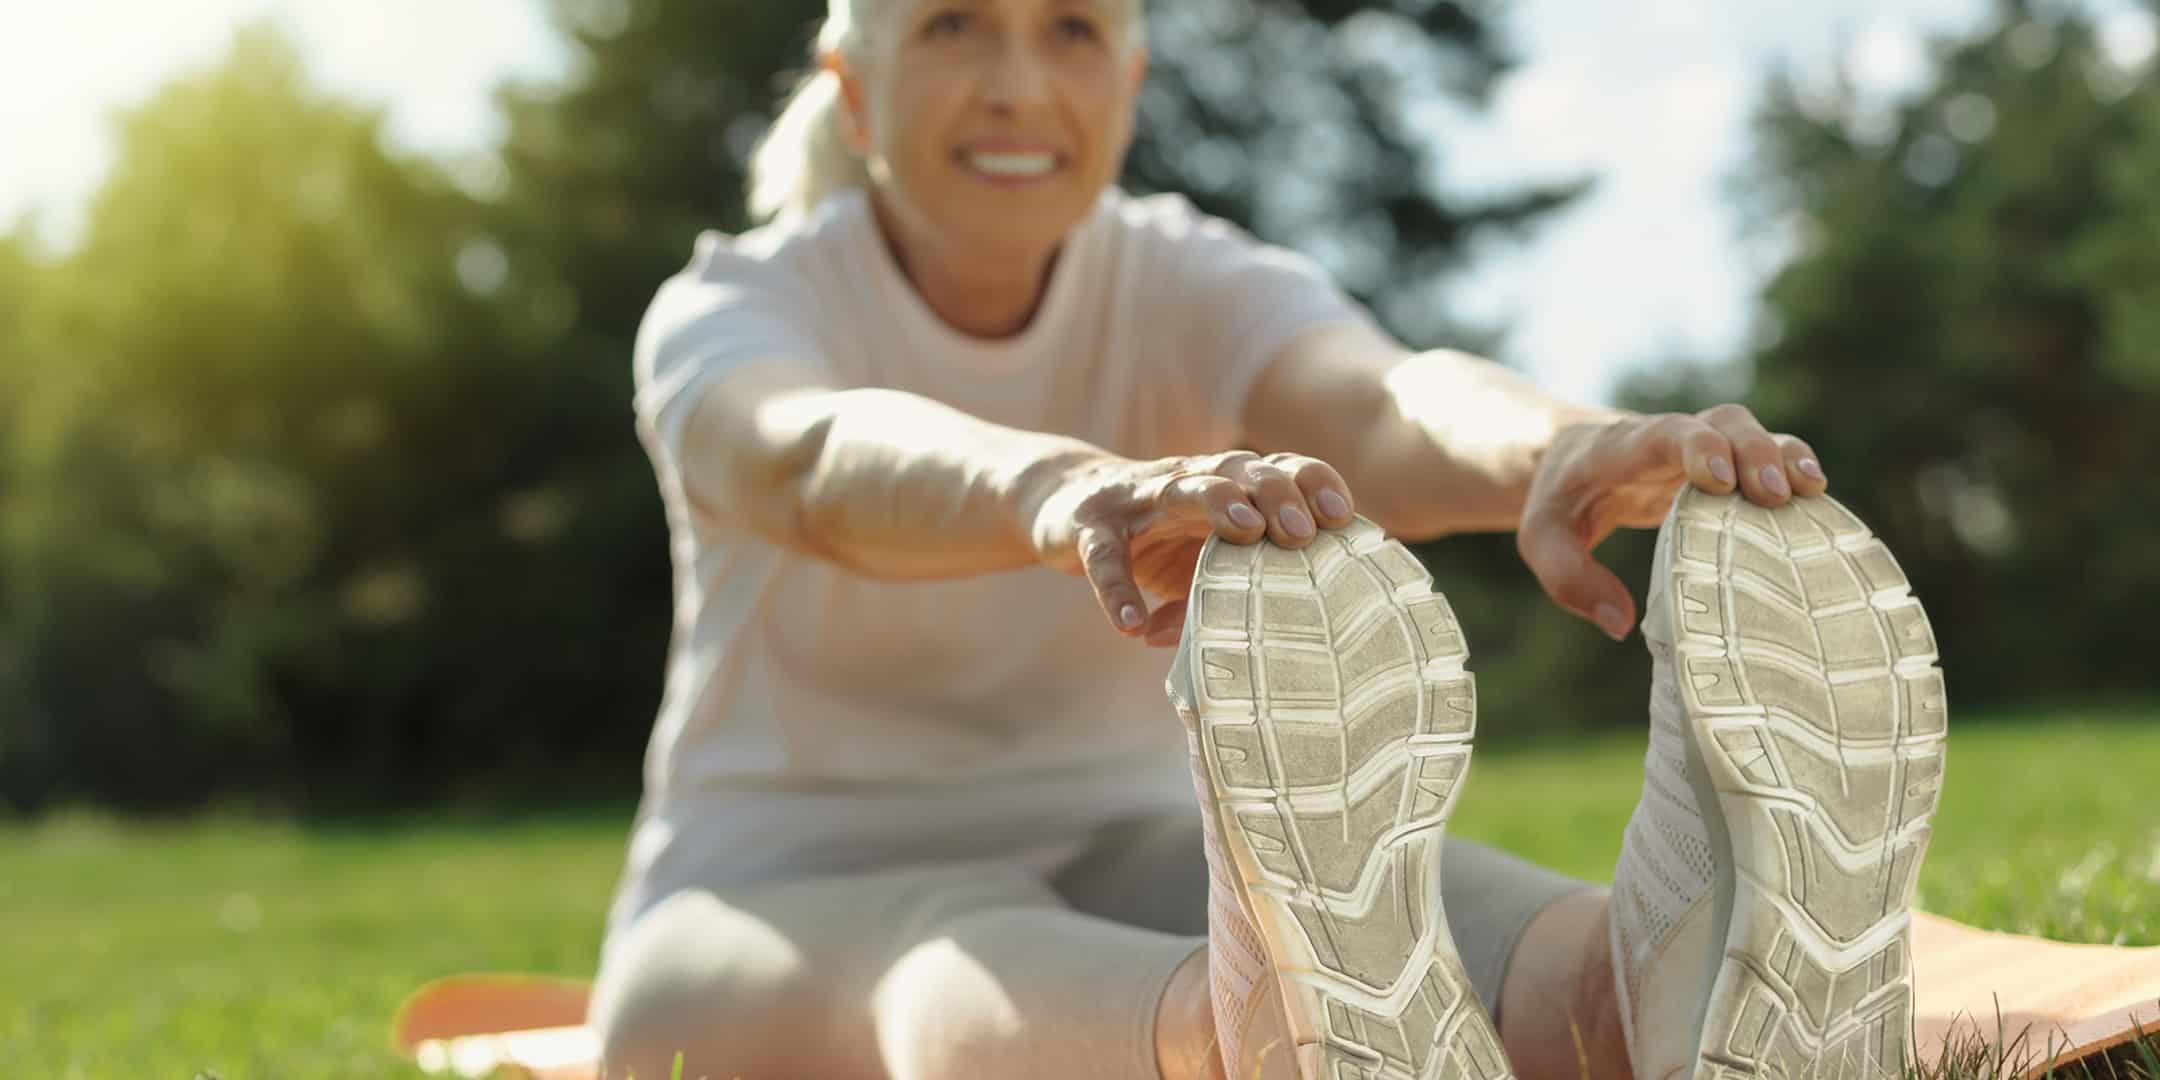 soft comfortable shoes for elderly